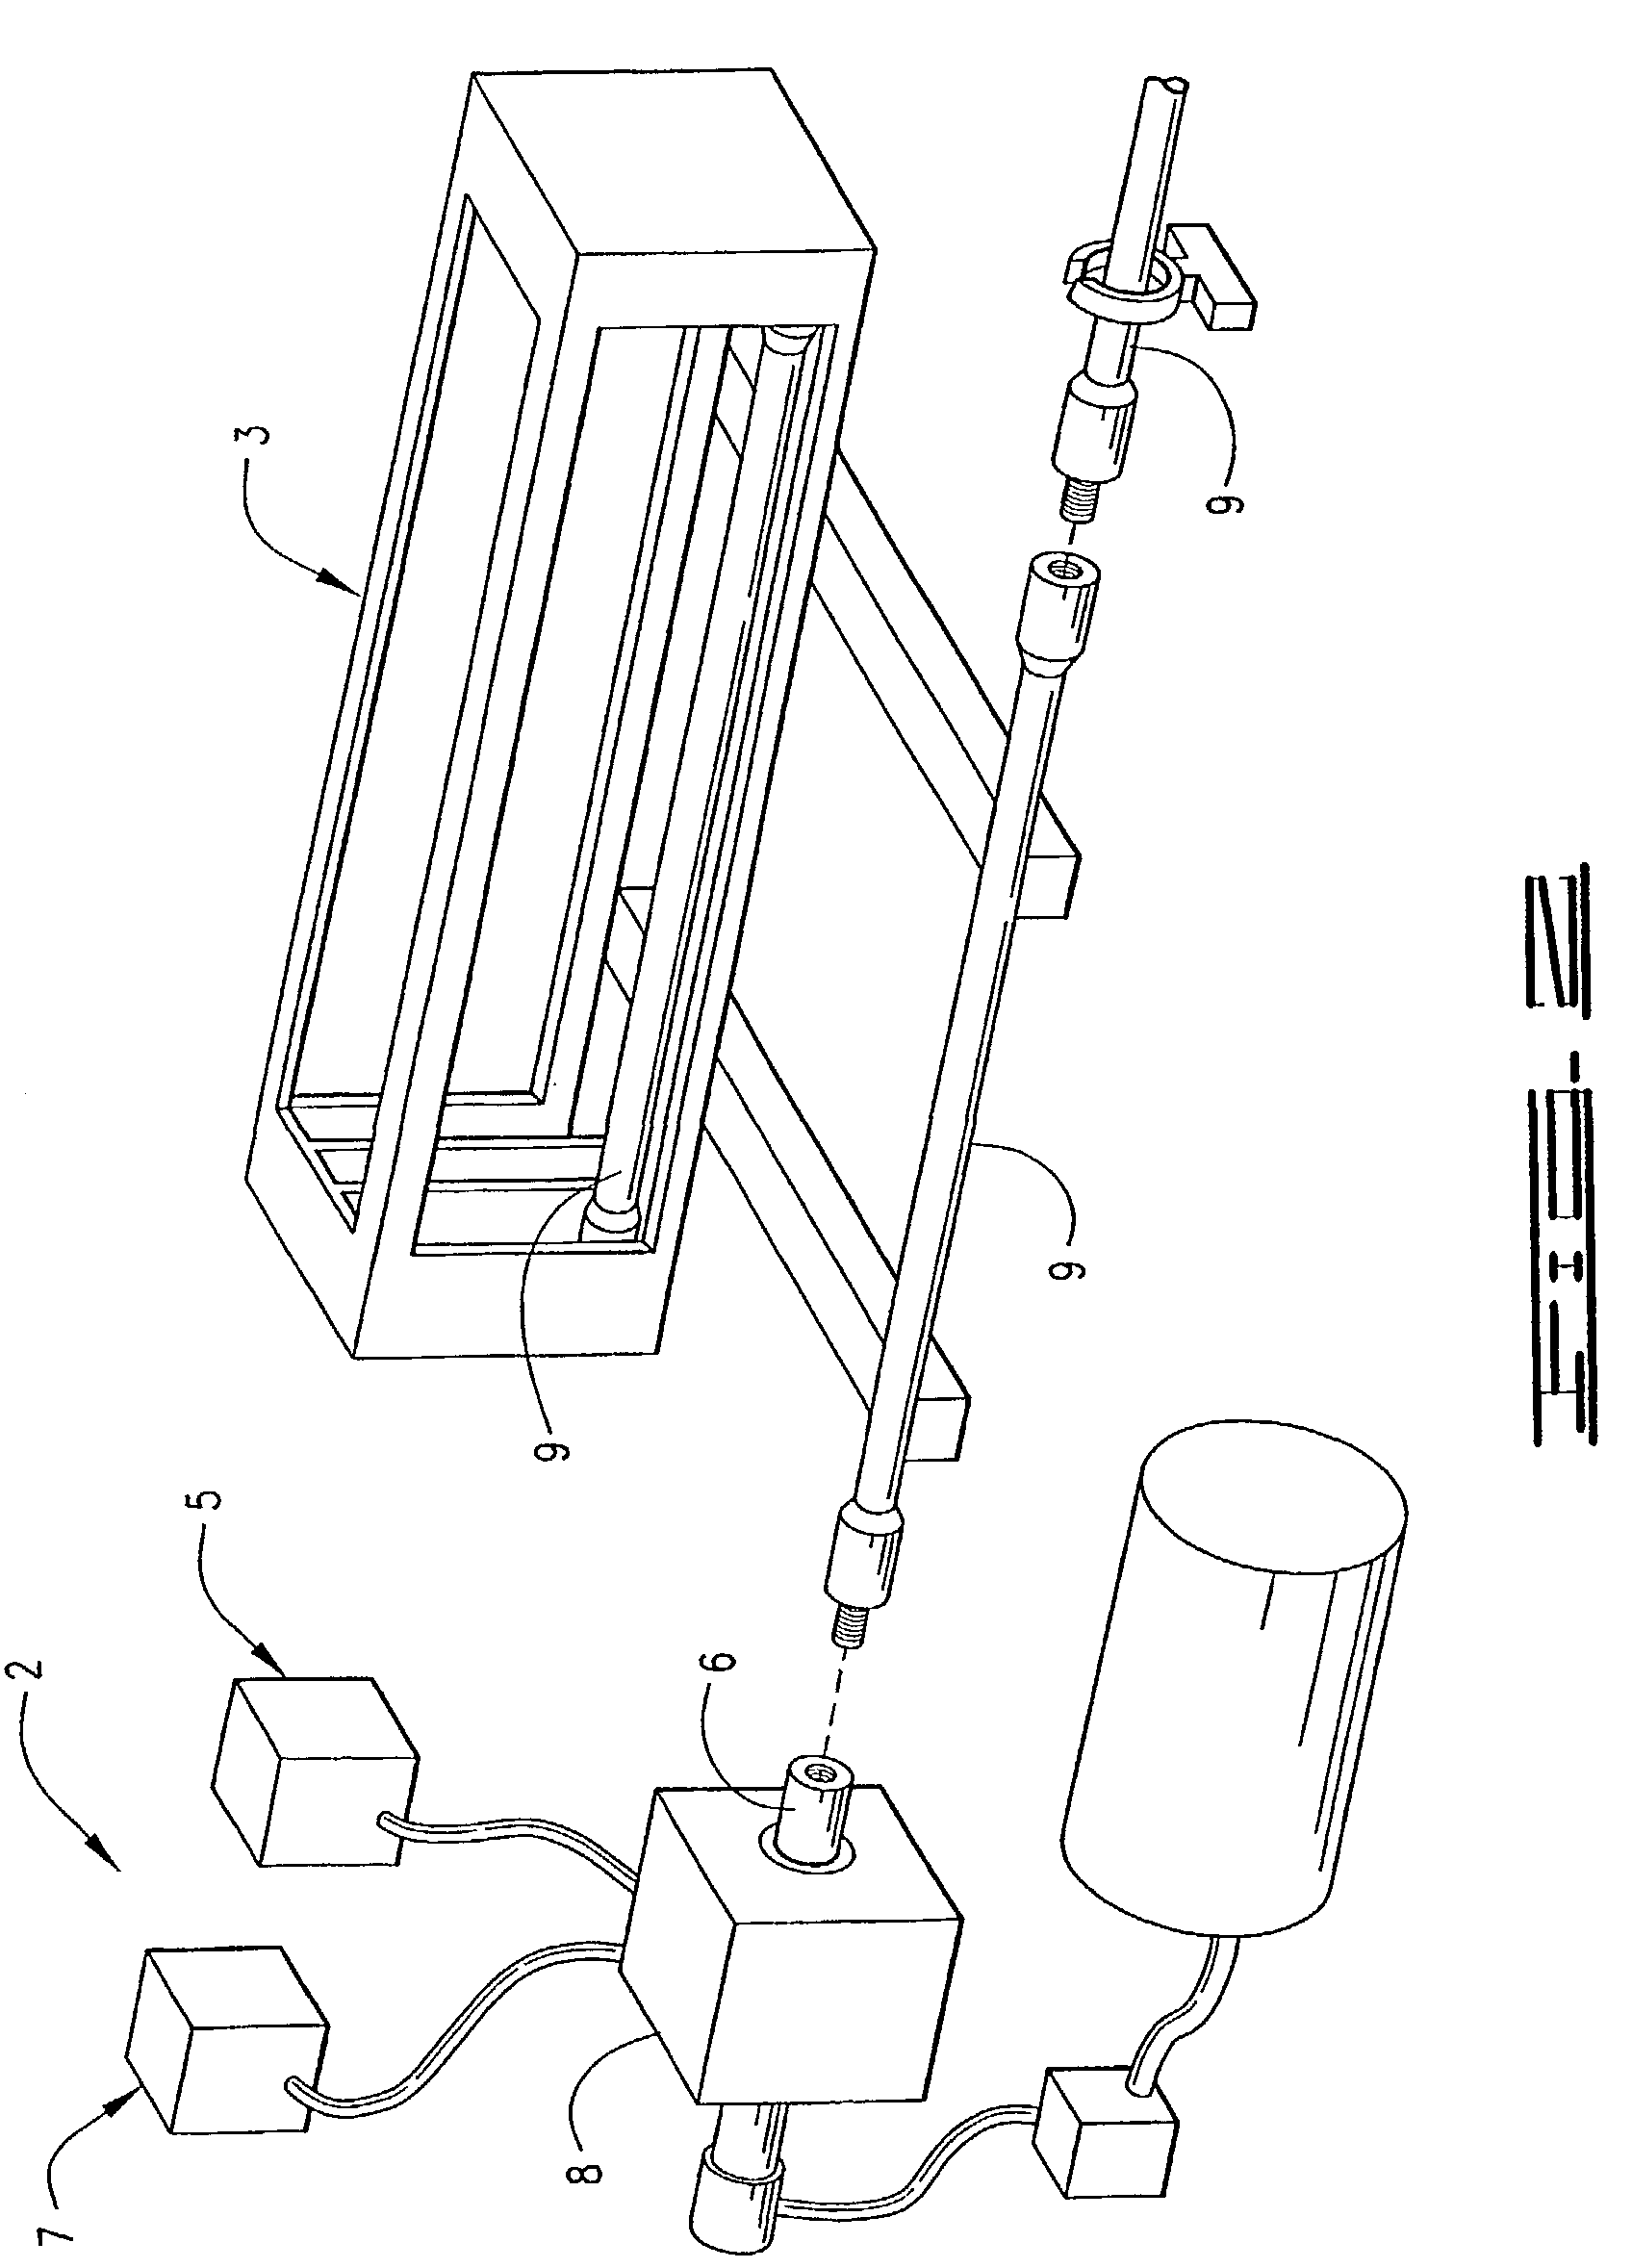 Apparatus and method for maintaining control of a drilling machine